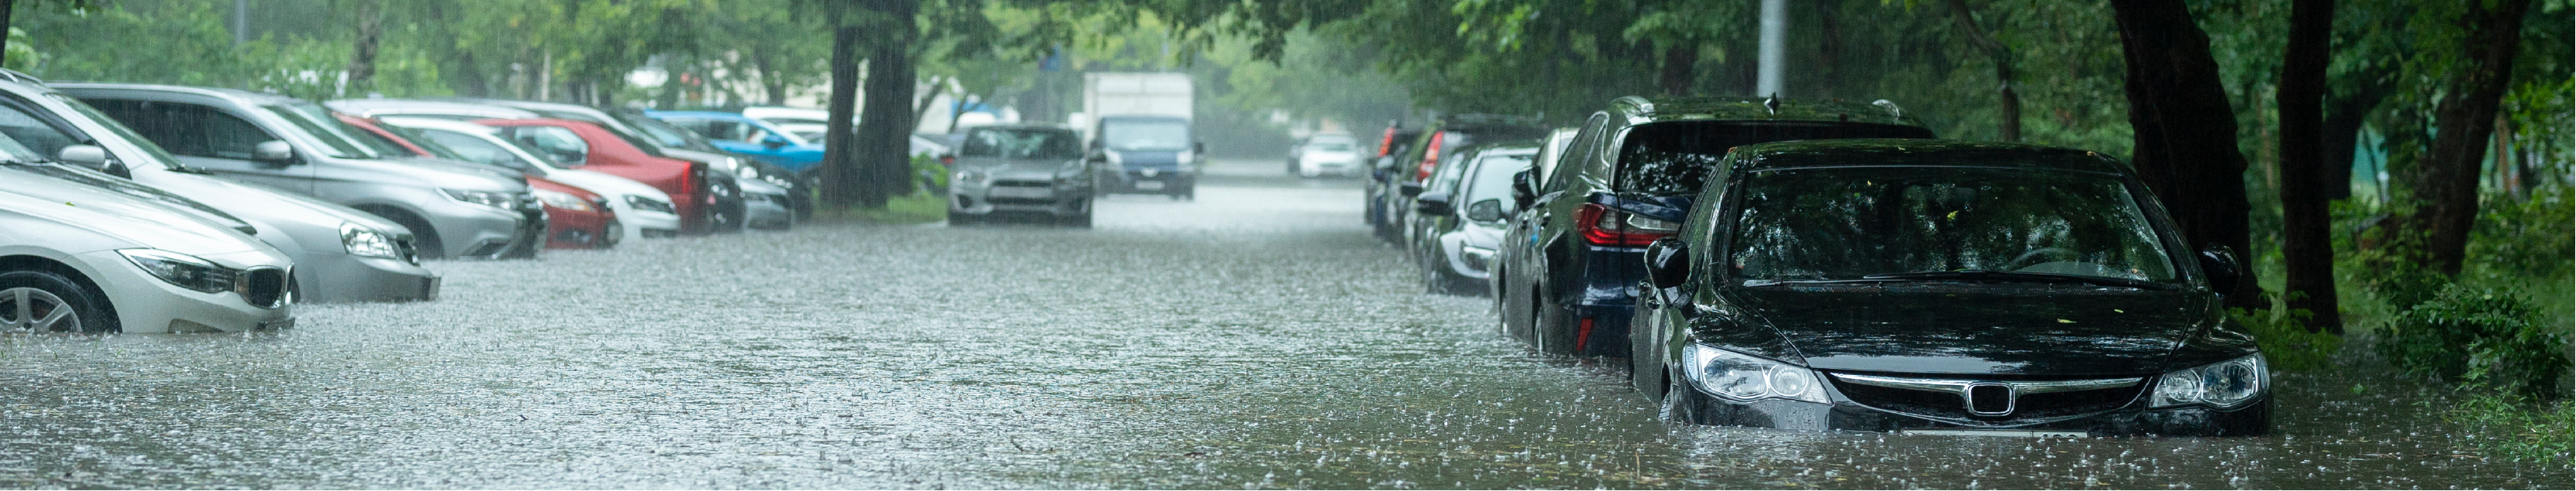 Image of cars on a flooded street